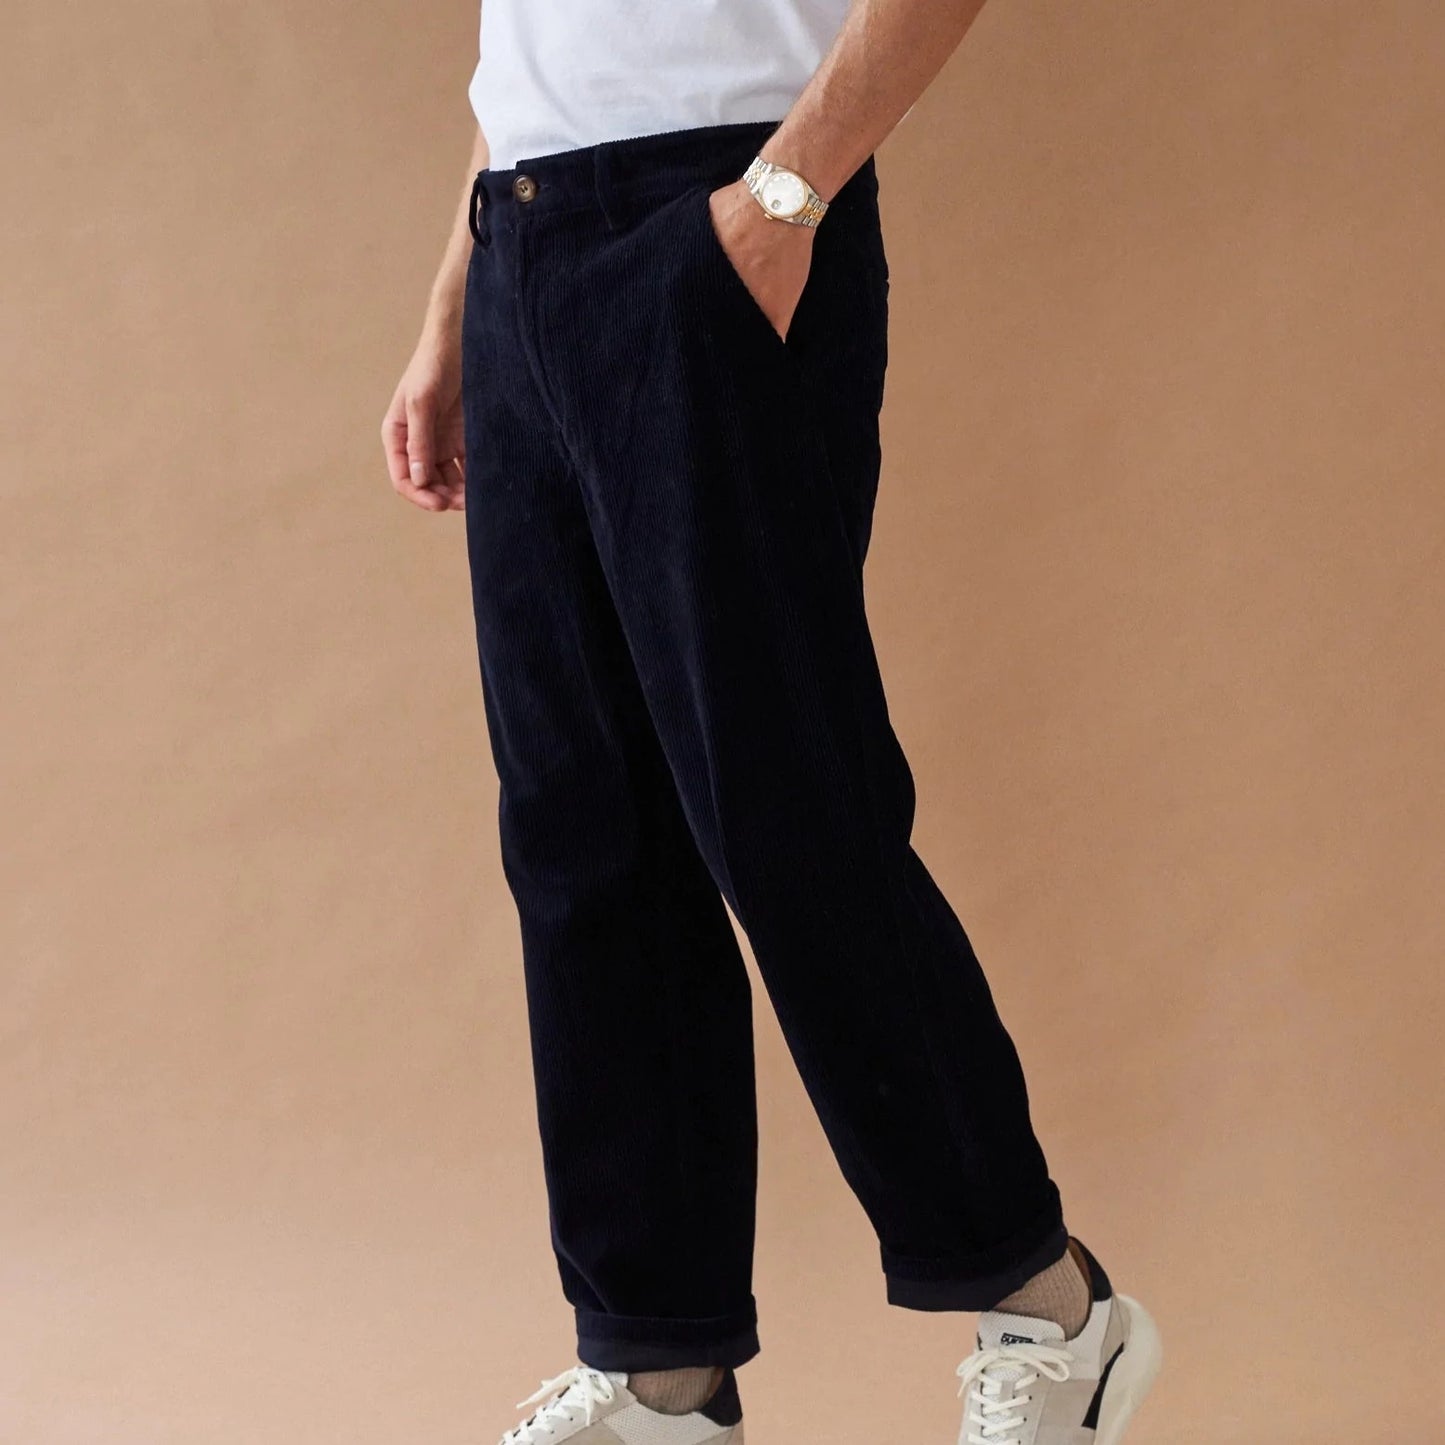 Buy Navy Blue Mens Corduroy Pants Limited Edition Dark Blue Online in India   Etsy